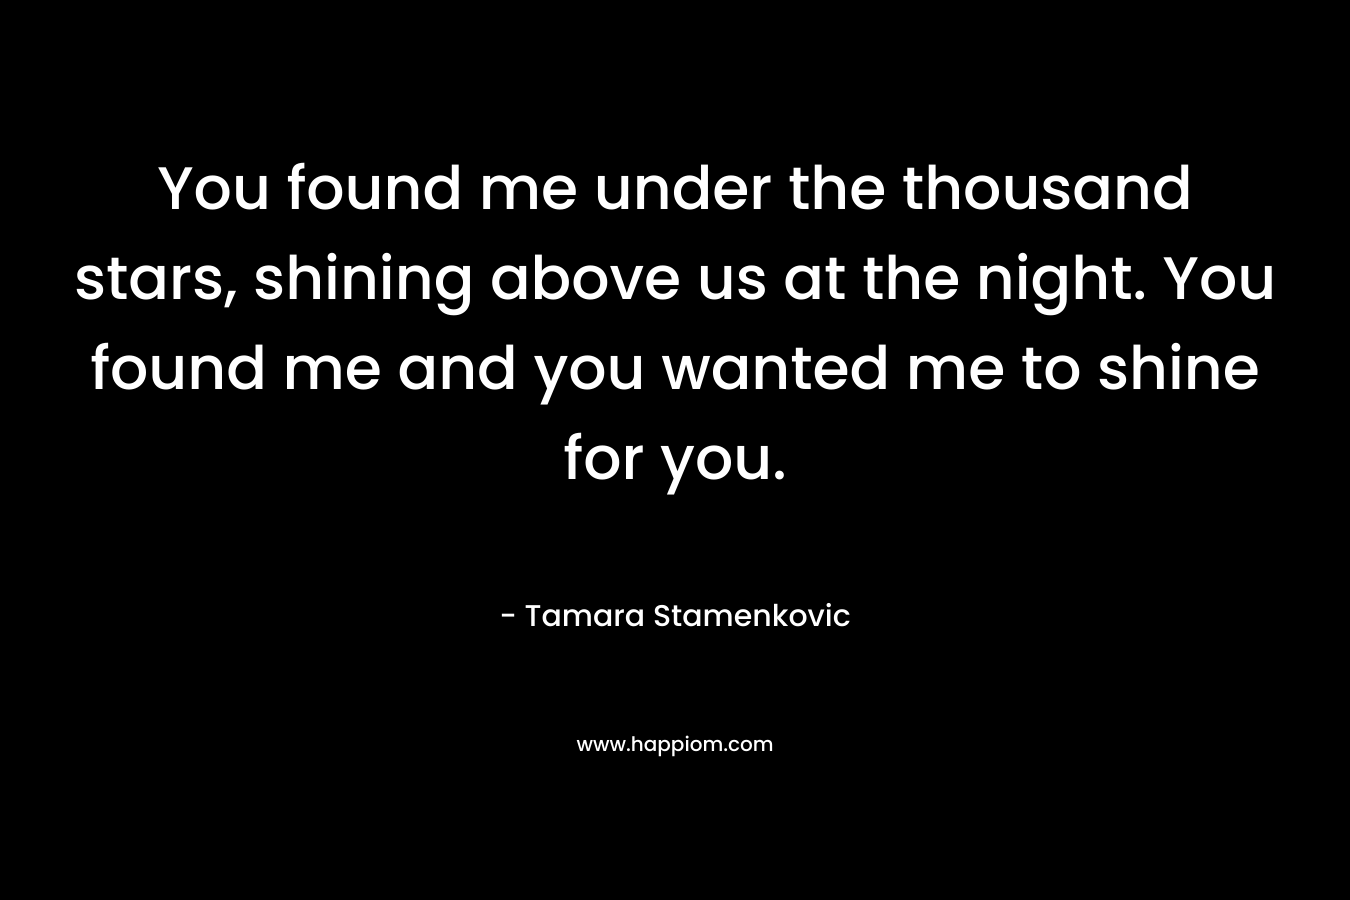 You found me under the thousand stars, shining above us at the night. You found me and you wanted me to shine for you. – Tamara Stamenkovic